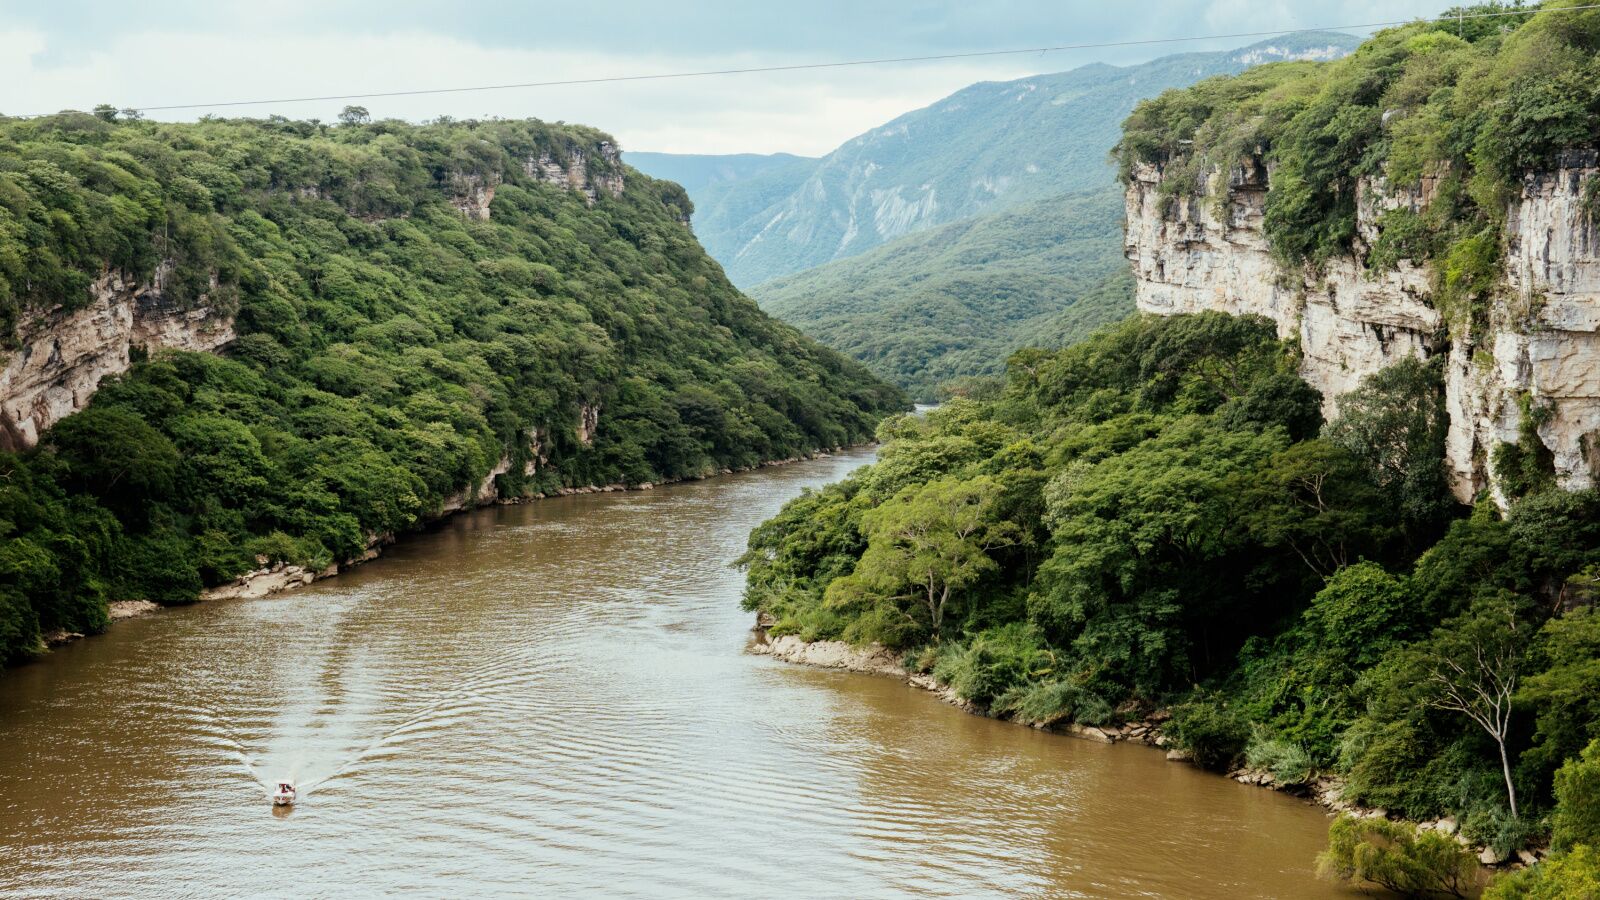 boat on the water in Sumidero Canyon